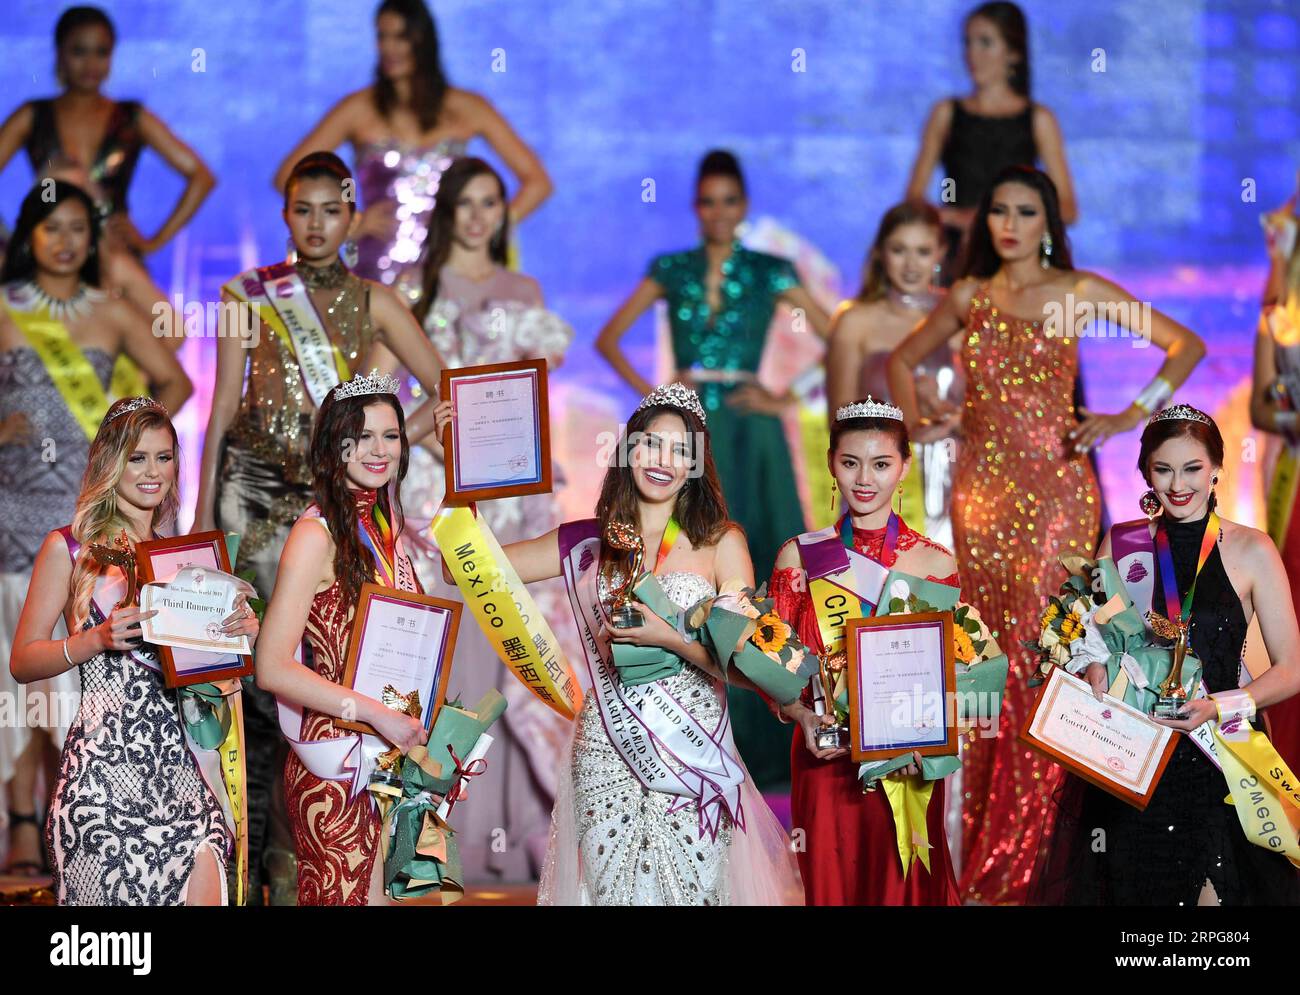 191007 -- QINGDAO, Oct. 7, 2019 -- Contestants are seen at the awarding ceremony during the Miss Tourism World 2019 Global Finals in Qingdao, east China s Shandong Province, Oct. 6, 2019. The beauty pageant concluded Sunday in the coastal city Qingdao, in which Miss Tourism Mexico Michelle Hewitt Zapata won the championship, Svetlana Mamaeva from Canada won the first runner-up, and Tan Ruoyi from China won the second runner-up. Contestants from over 60 countries and regions, including the United States, Venezuela, France, Brazil, SCO Shanghai Cooperation Organization member states as well as B Stock Photo